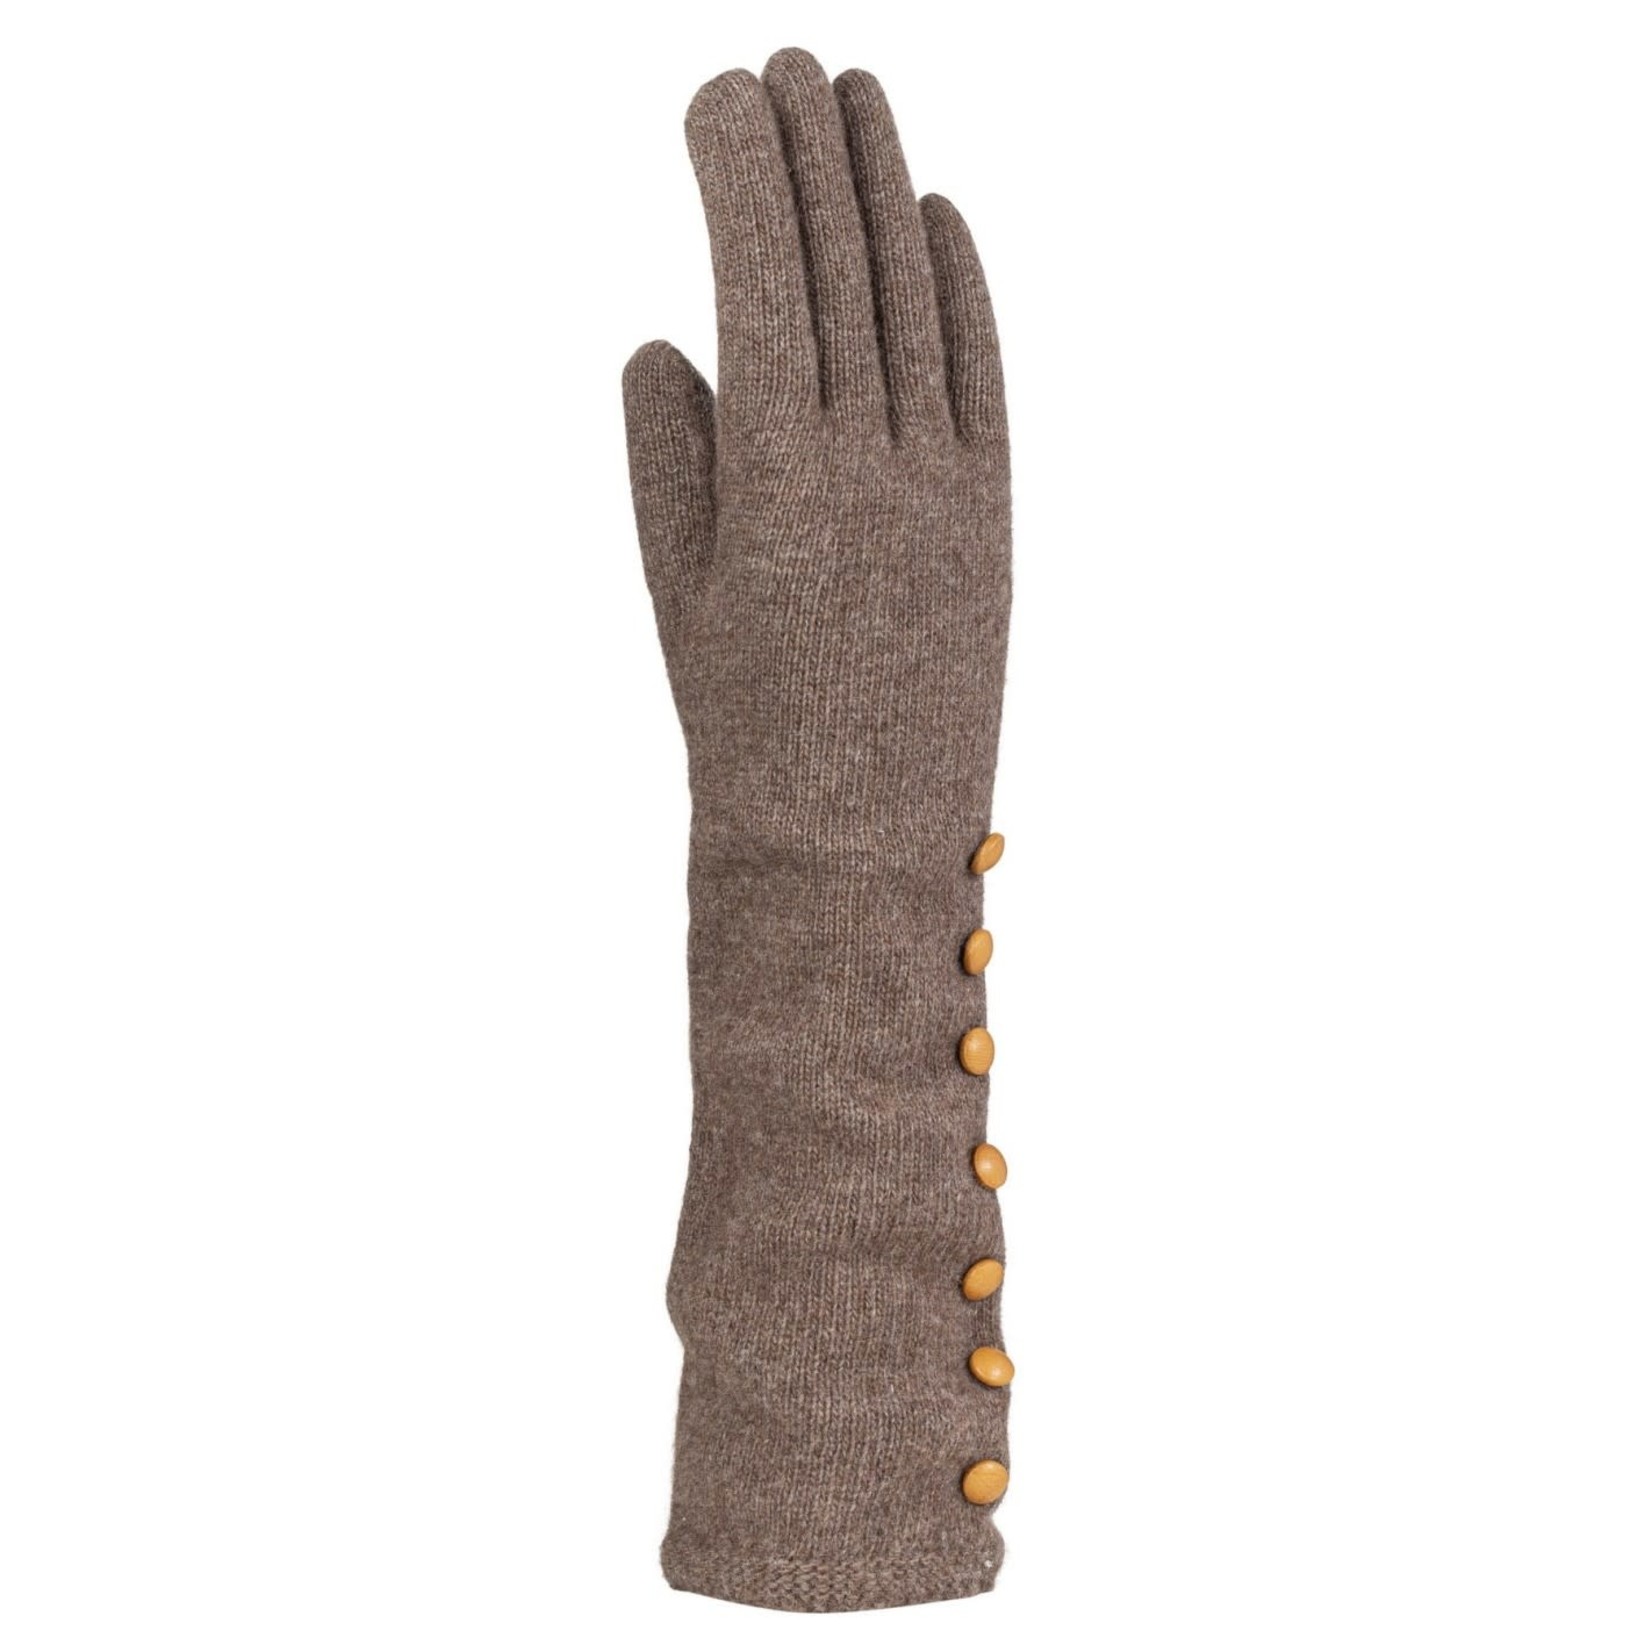 SANTACANA COMPLEMENTOS SI Long Wool Leather Button Gloves Sand